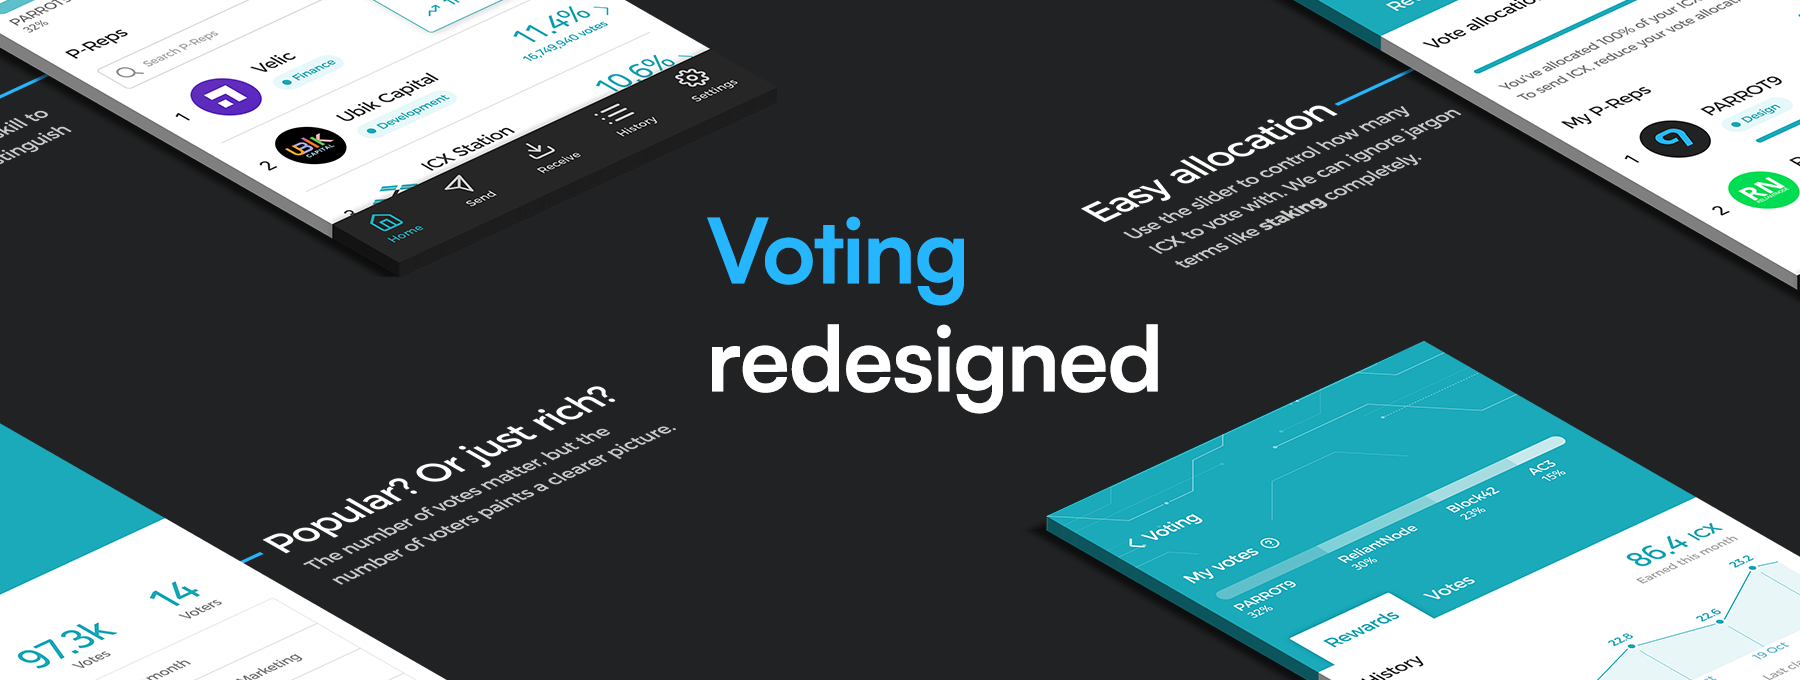 Voting could be ICON’s killer app. Here’s how to design it.